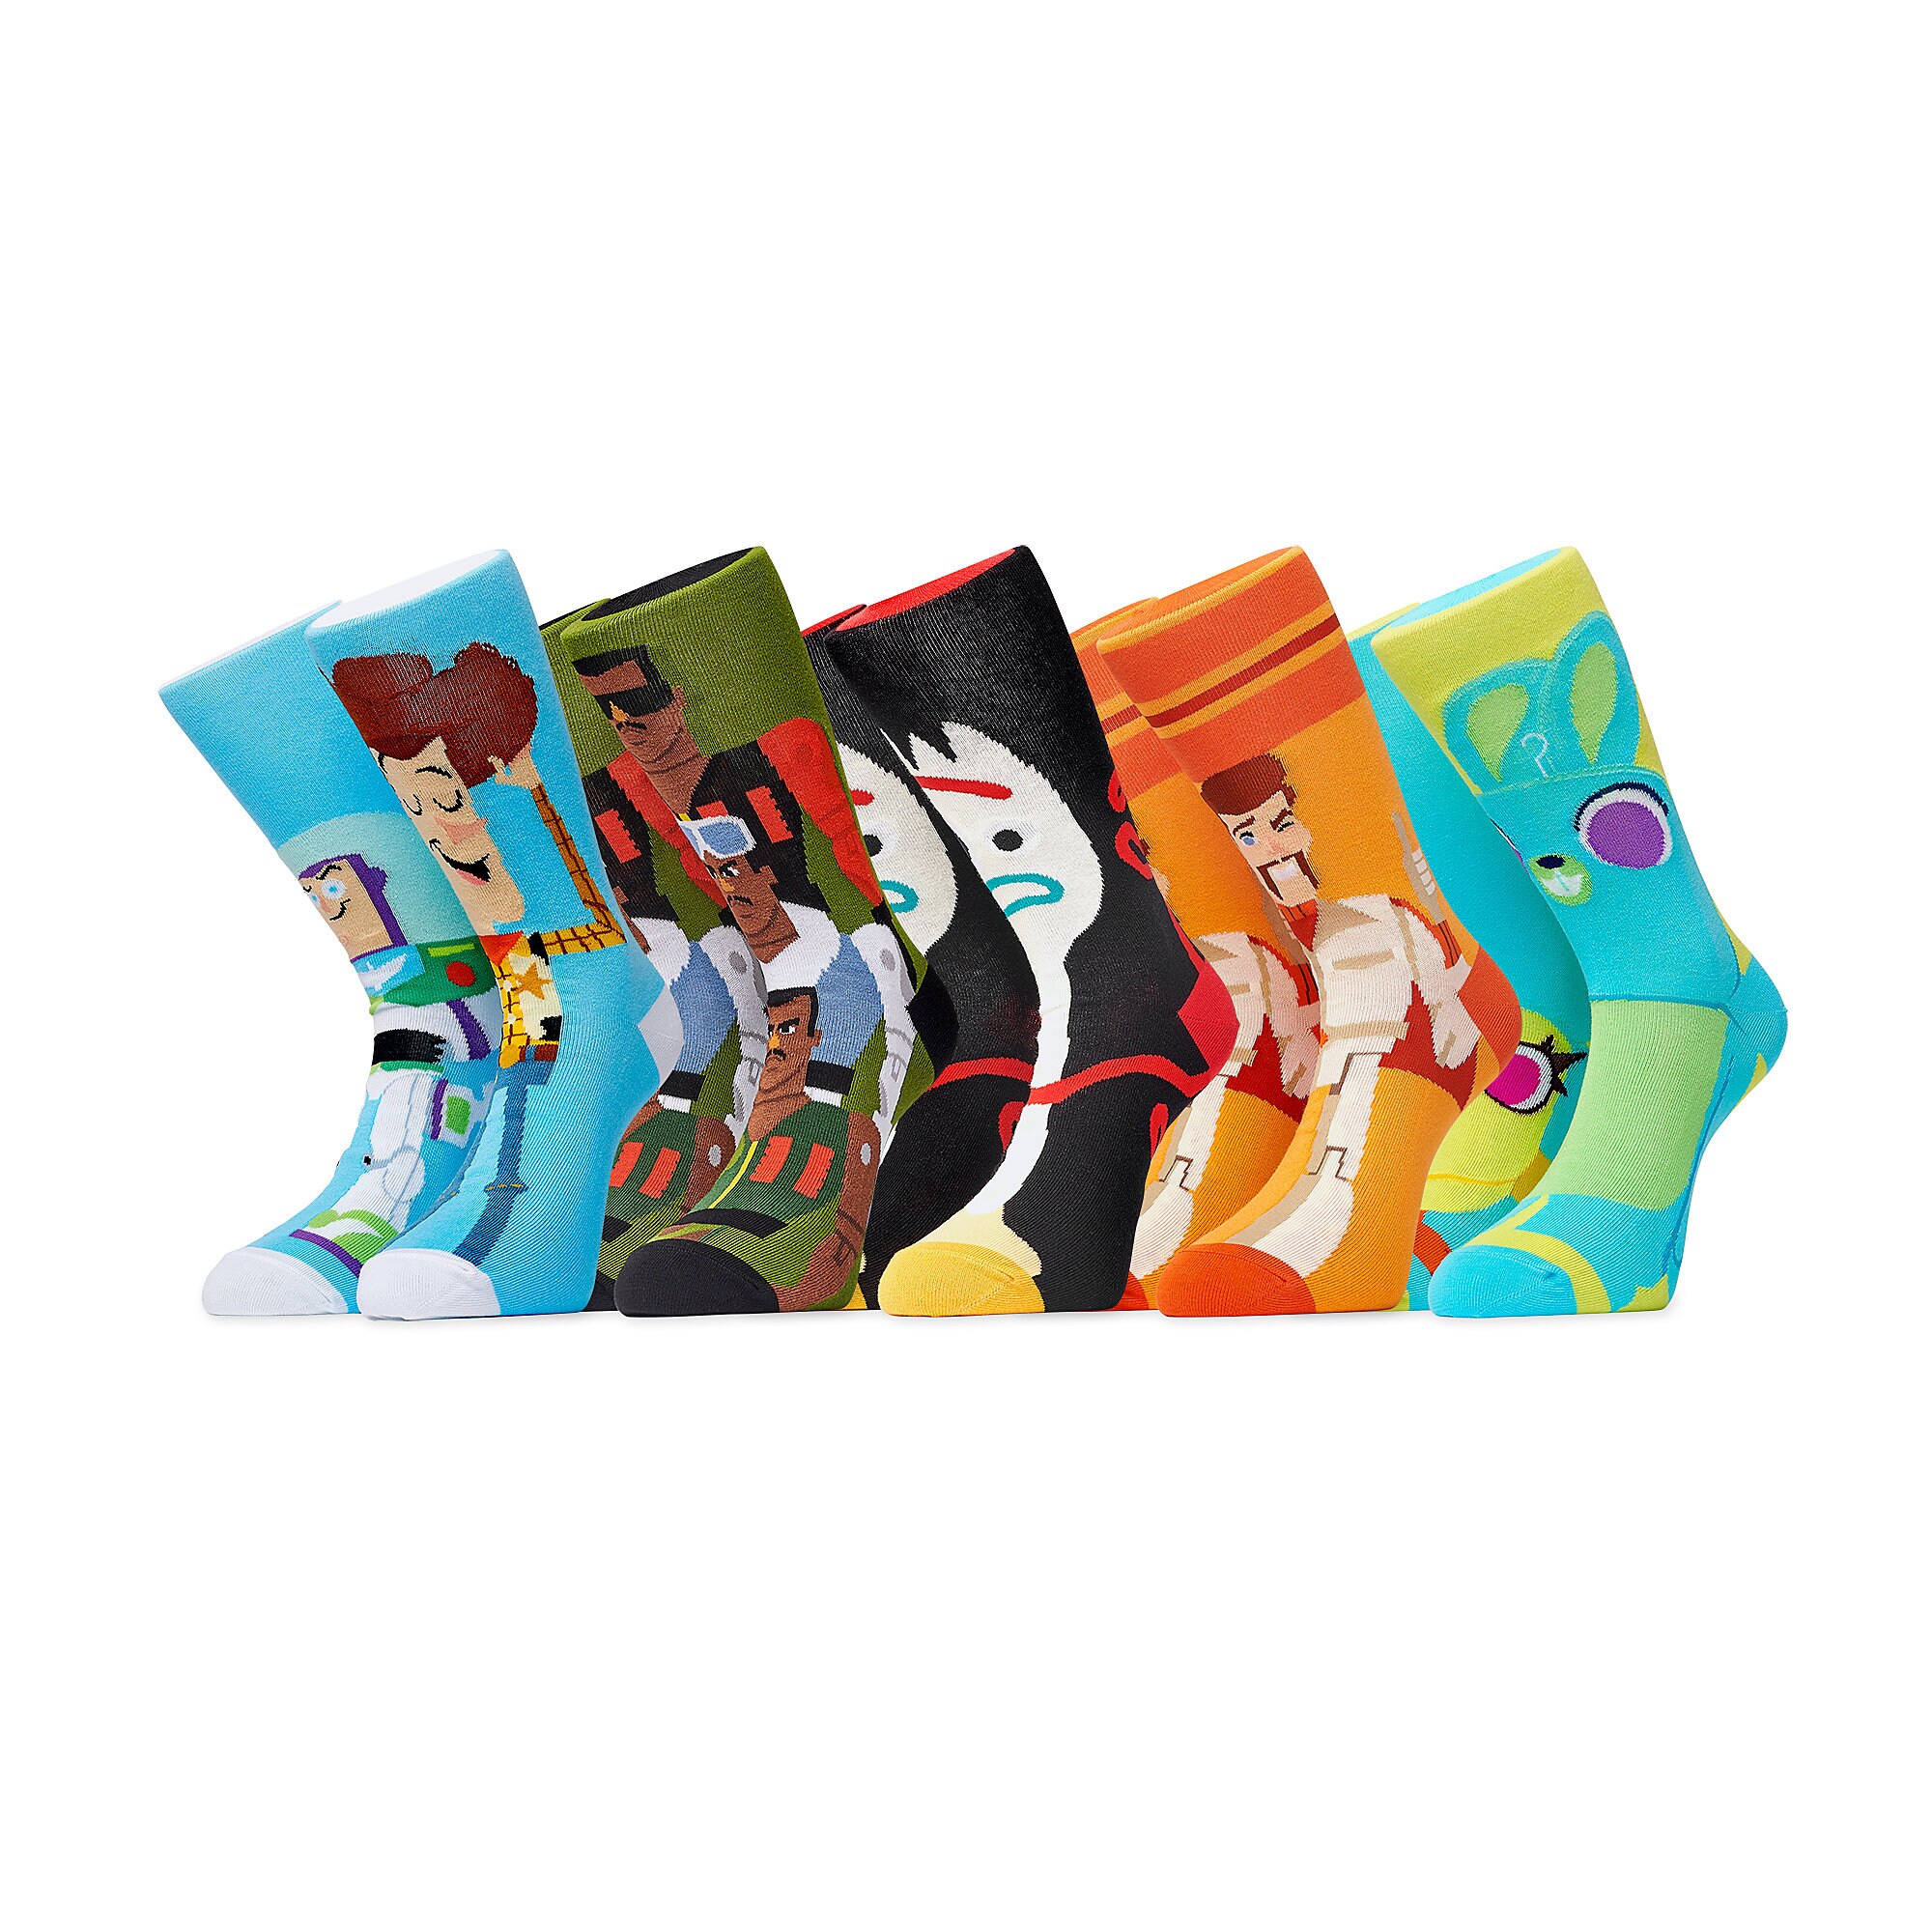 Toy Story 4 Sock Set for Adults - 5 Pack